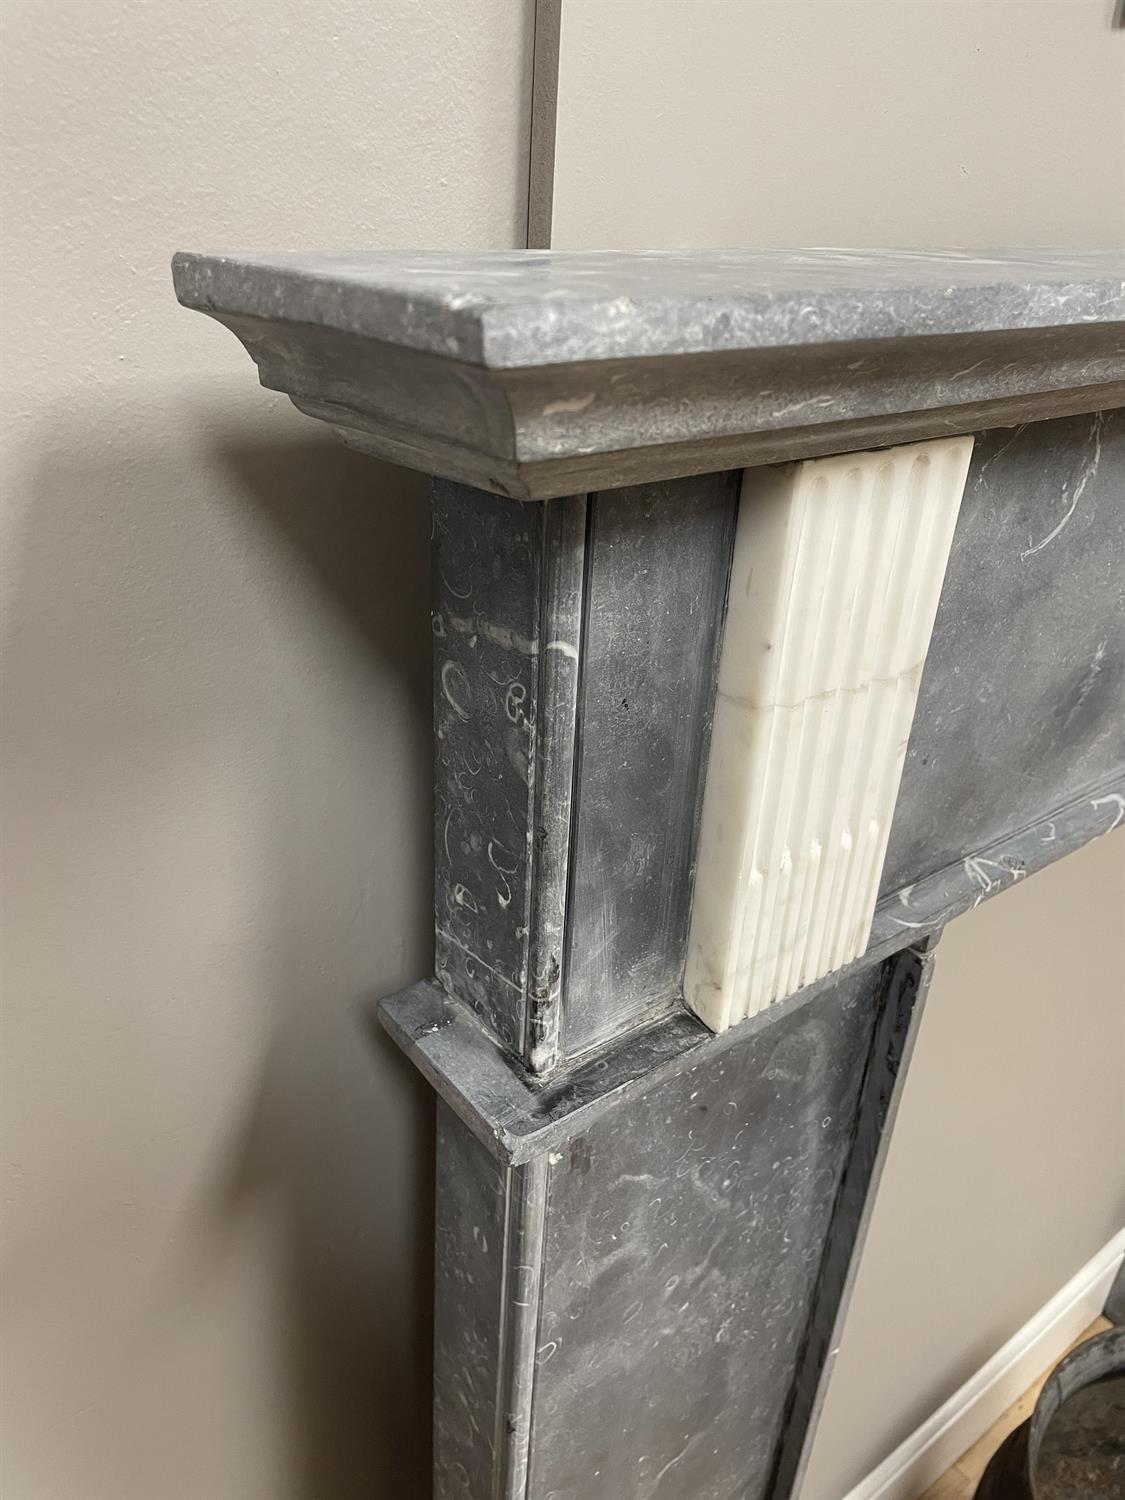 A KILKENNY BLACK MARBLE FIREPLACE C. 1800 with frieze pediment on plain column supports. - Image 11 of 13